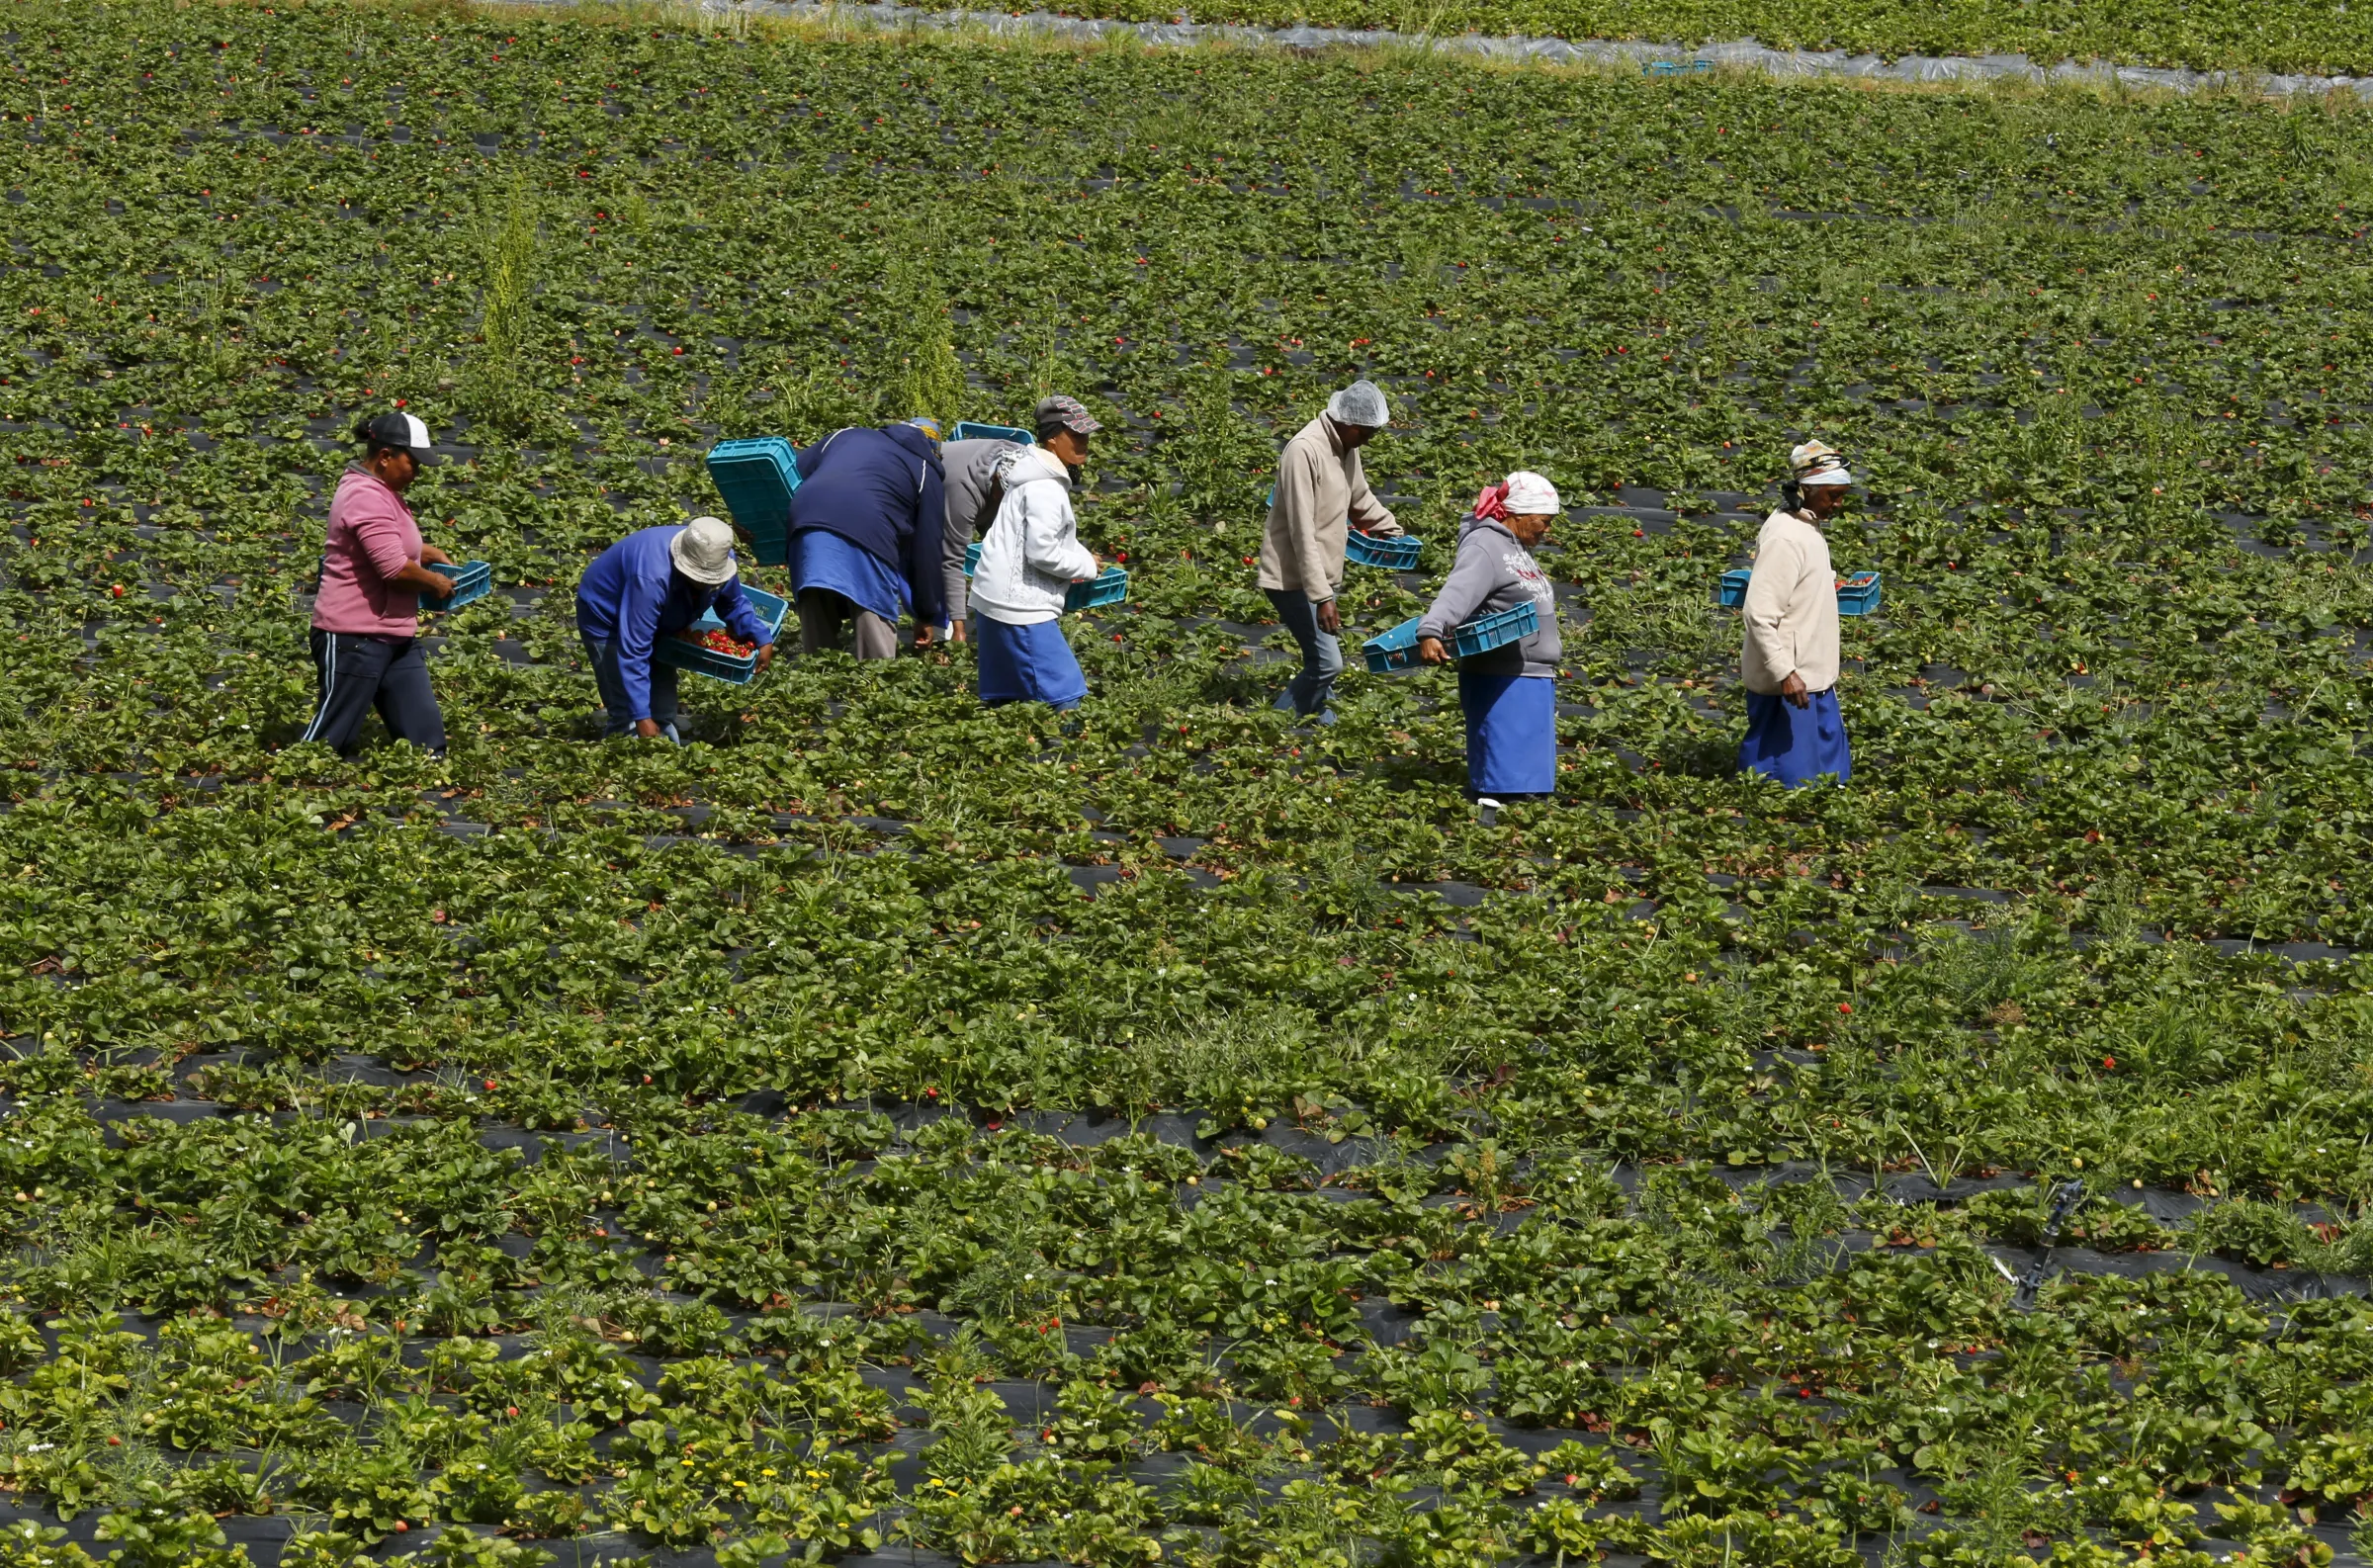 Workers pick strawberries at a farm near Stellenbosch, South Africa